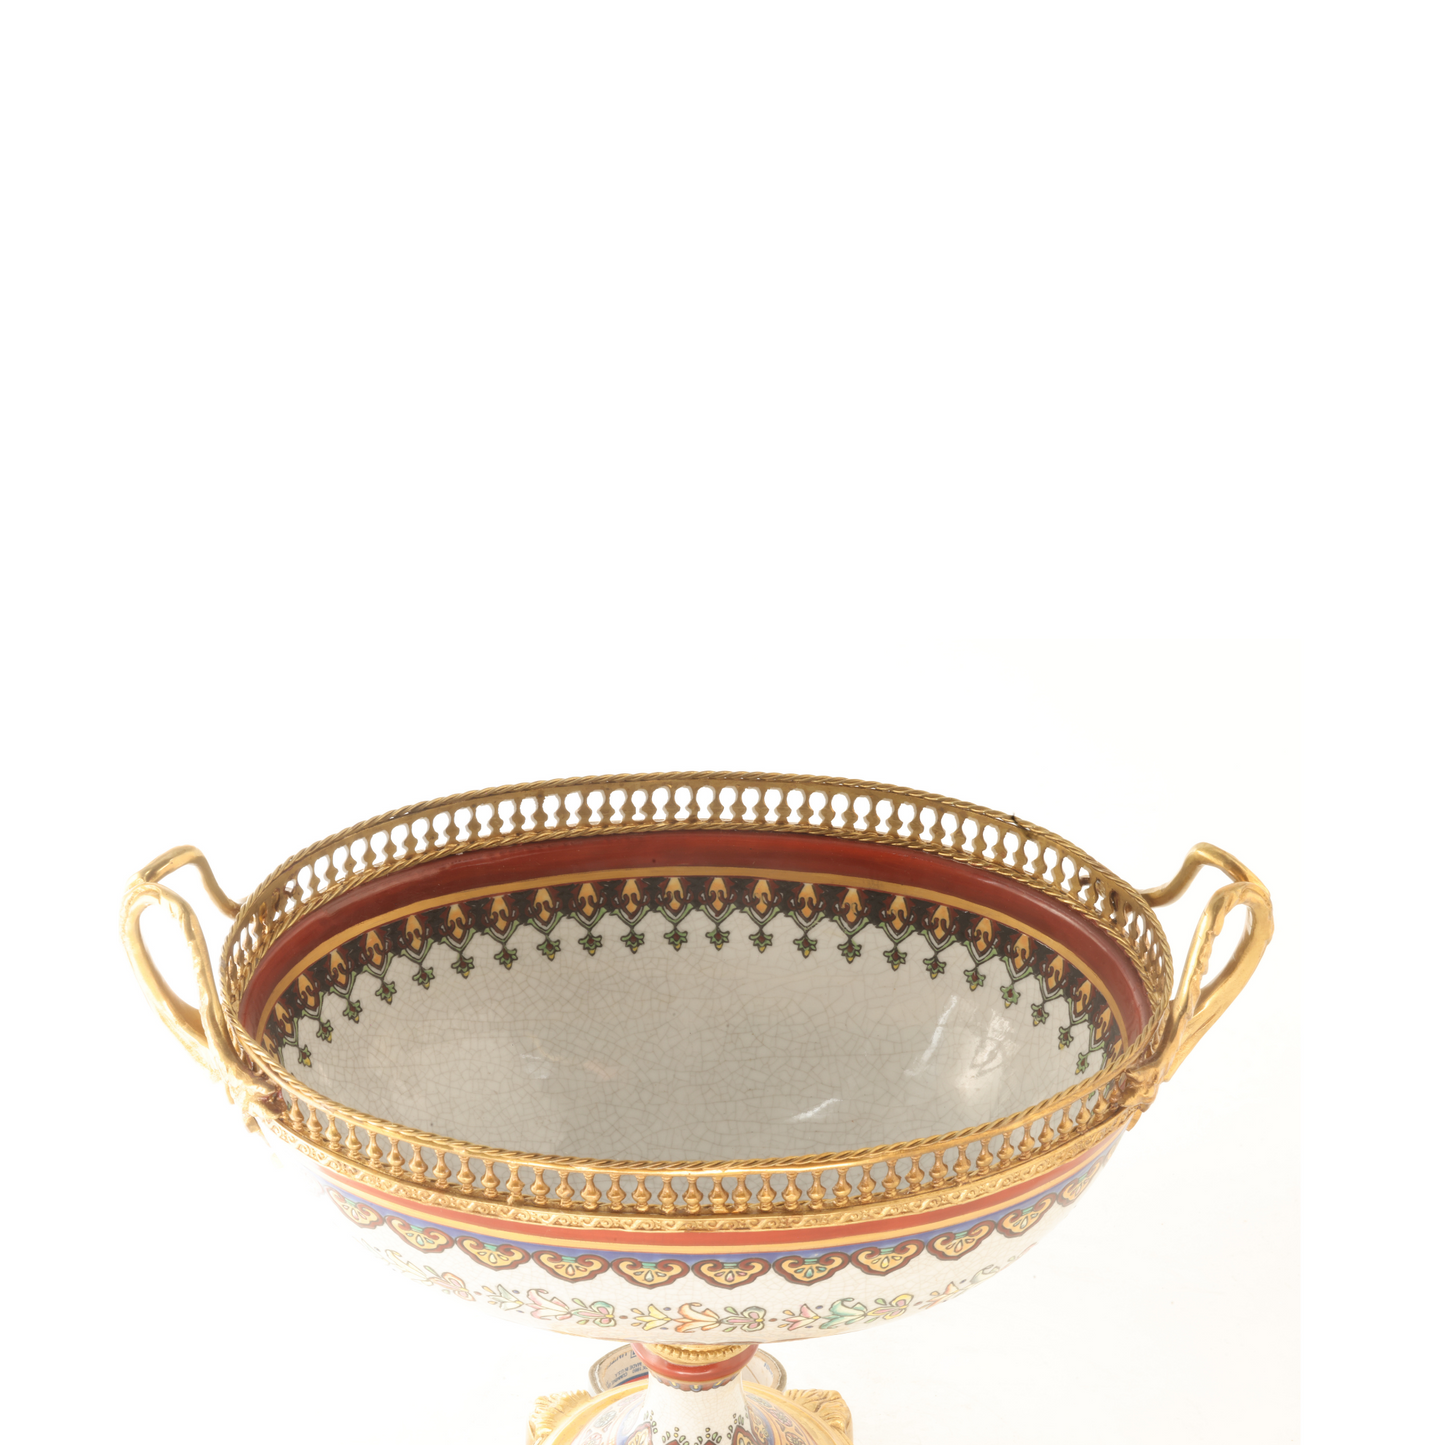 Sophisticated Oval Serving Bowl